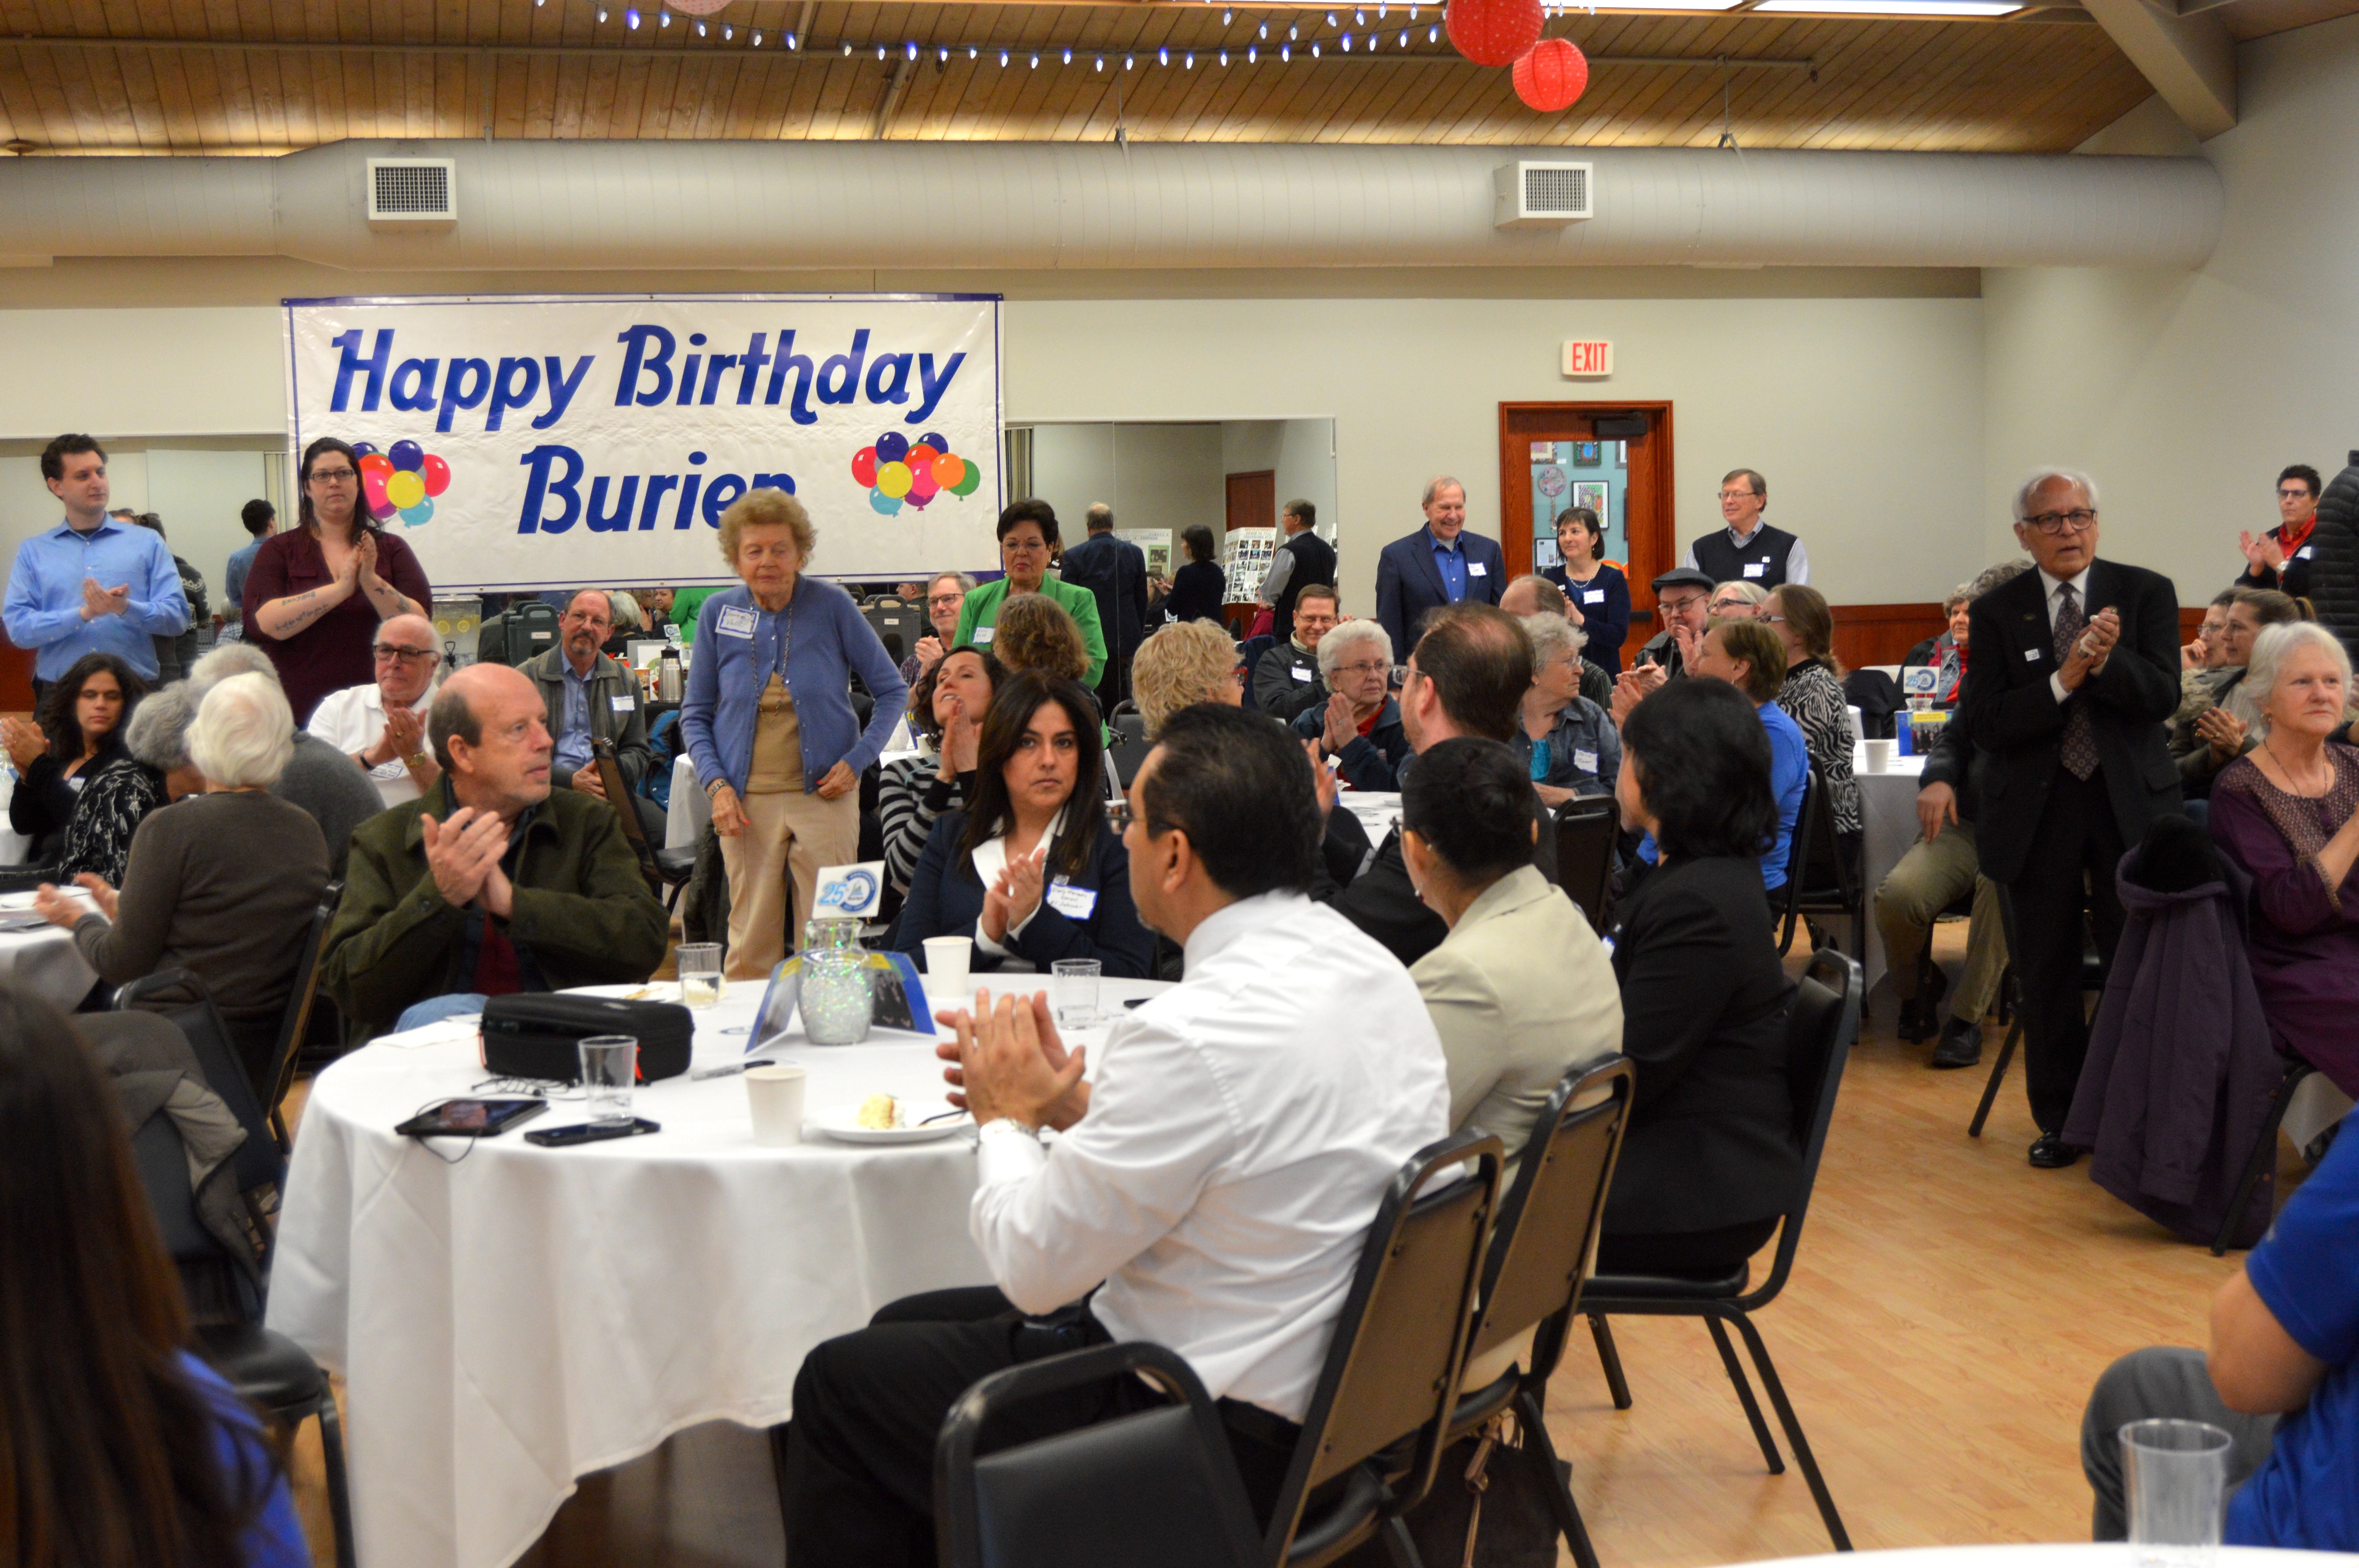 Former mayors and city officials joined current city staff in celebration of Burien's 25th birthday